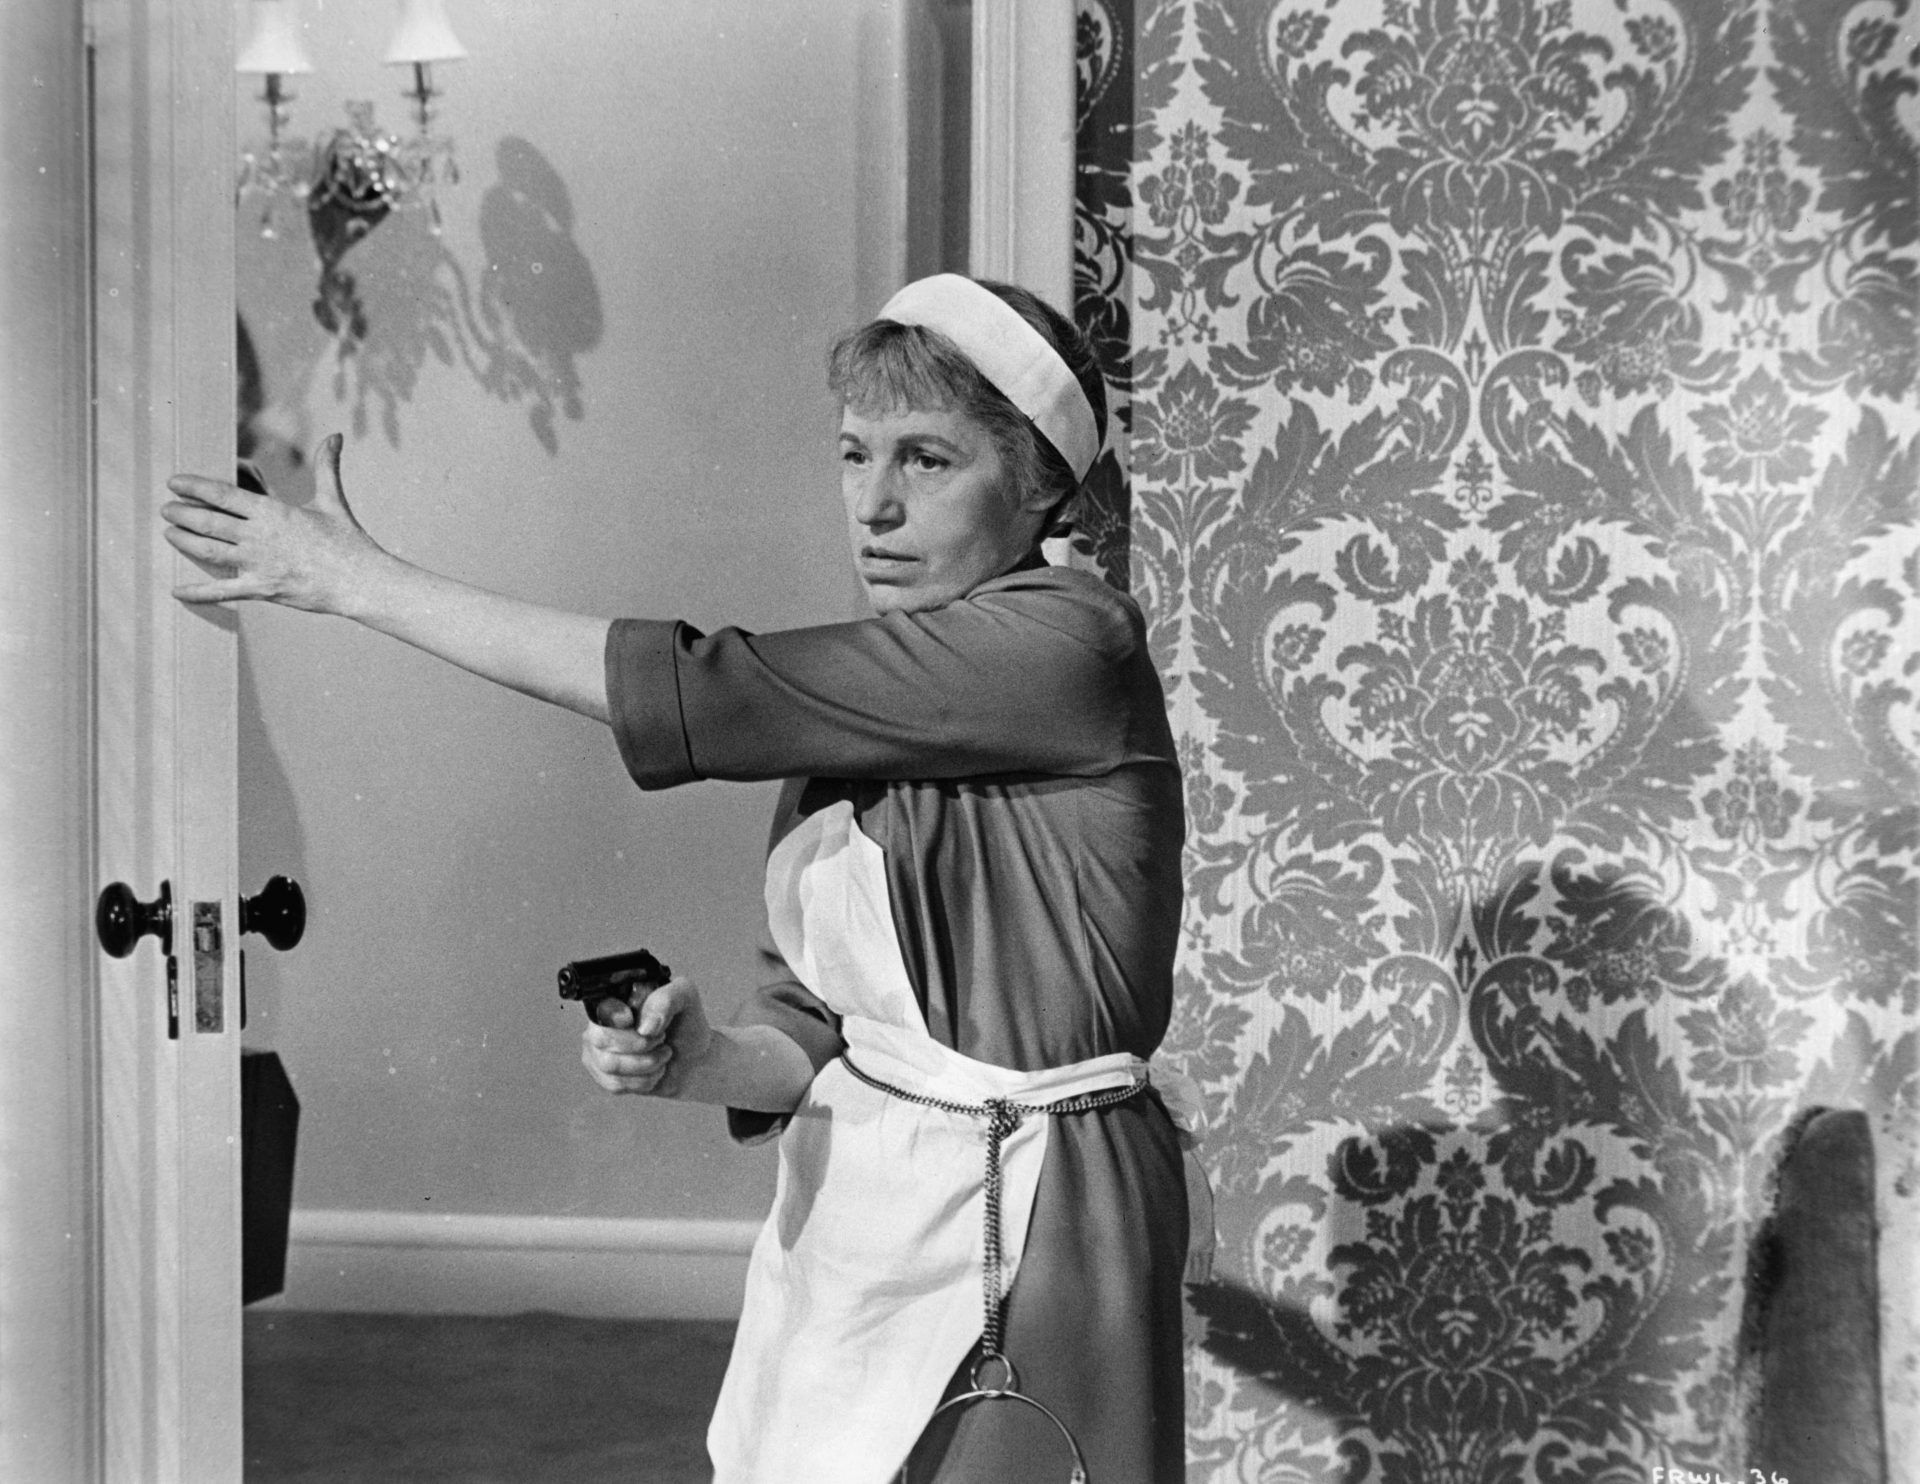 Lotte Lenya in her most famous role, as the ingeniously shod SPECTRE agent Rosa Klebb in From Russia with Love. Photo: United Artists/ Getty Images.